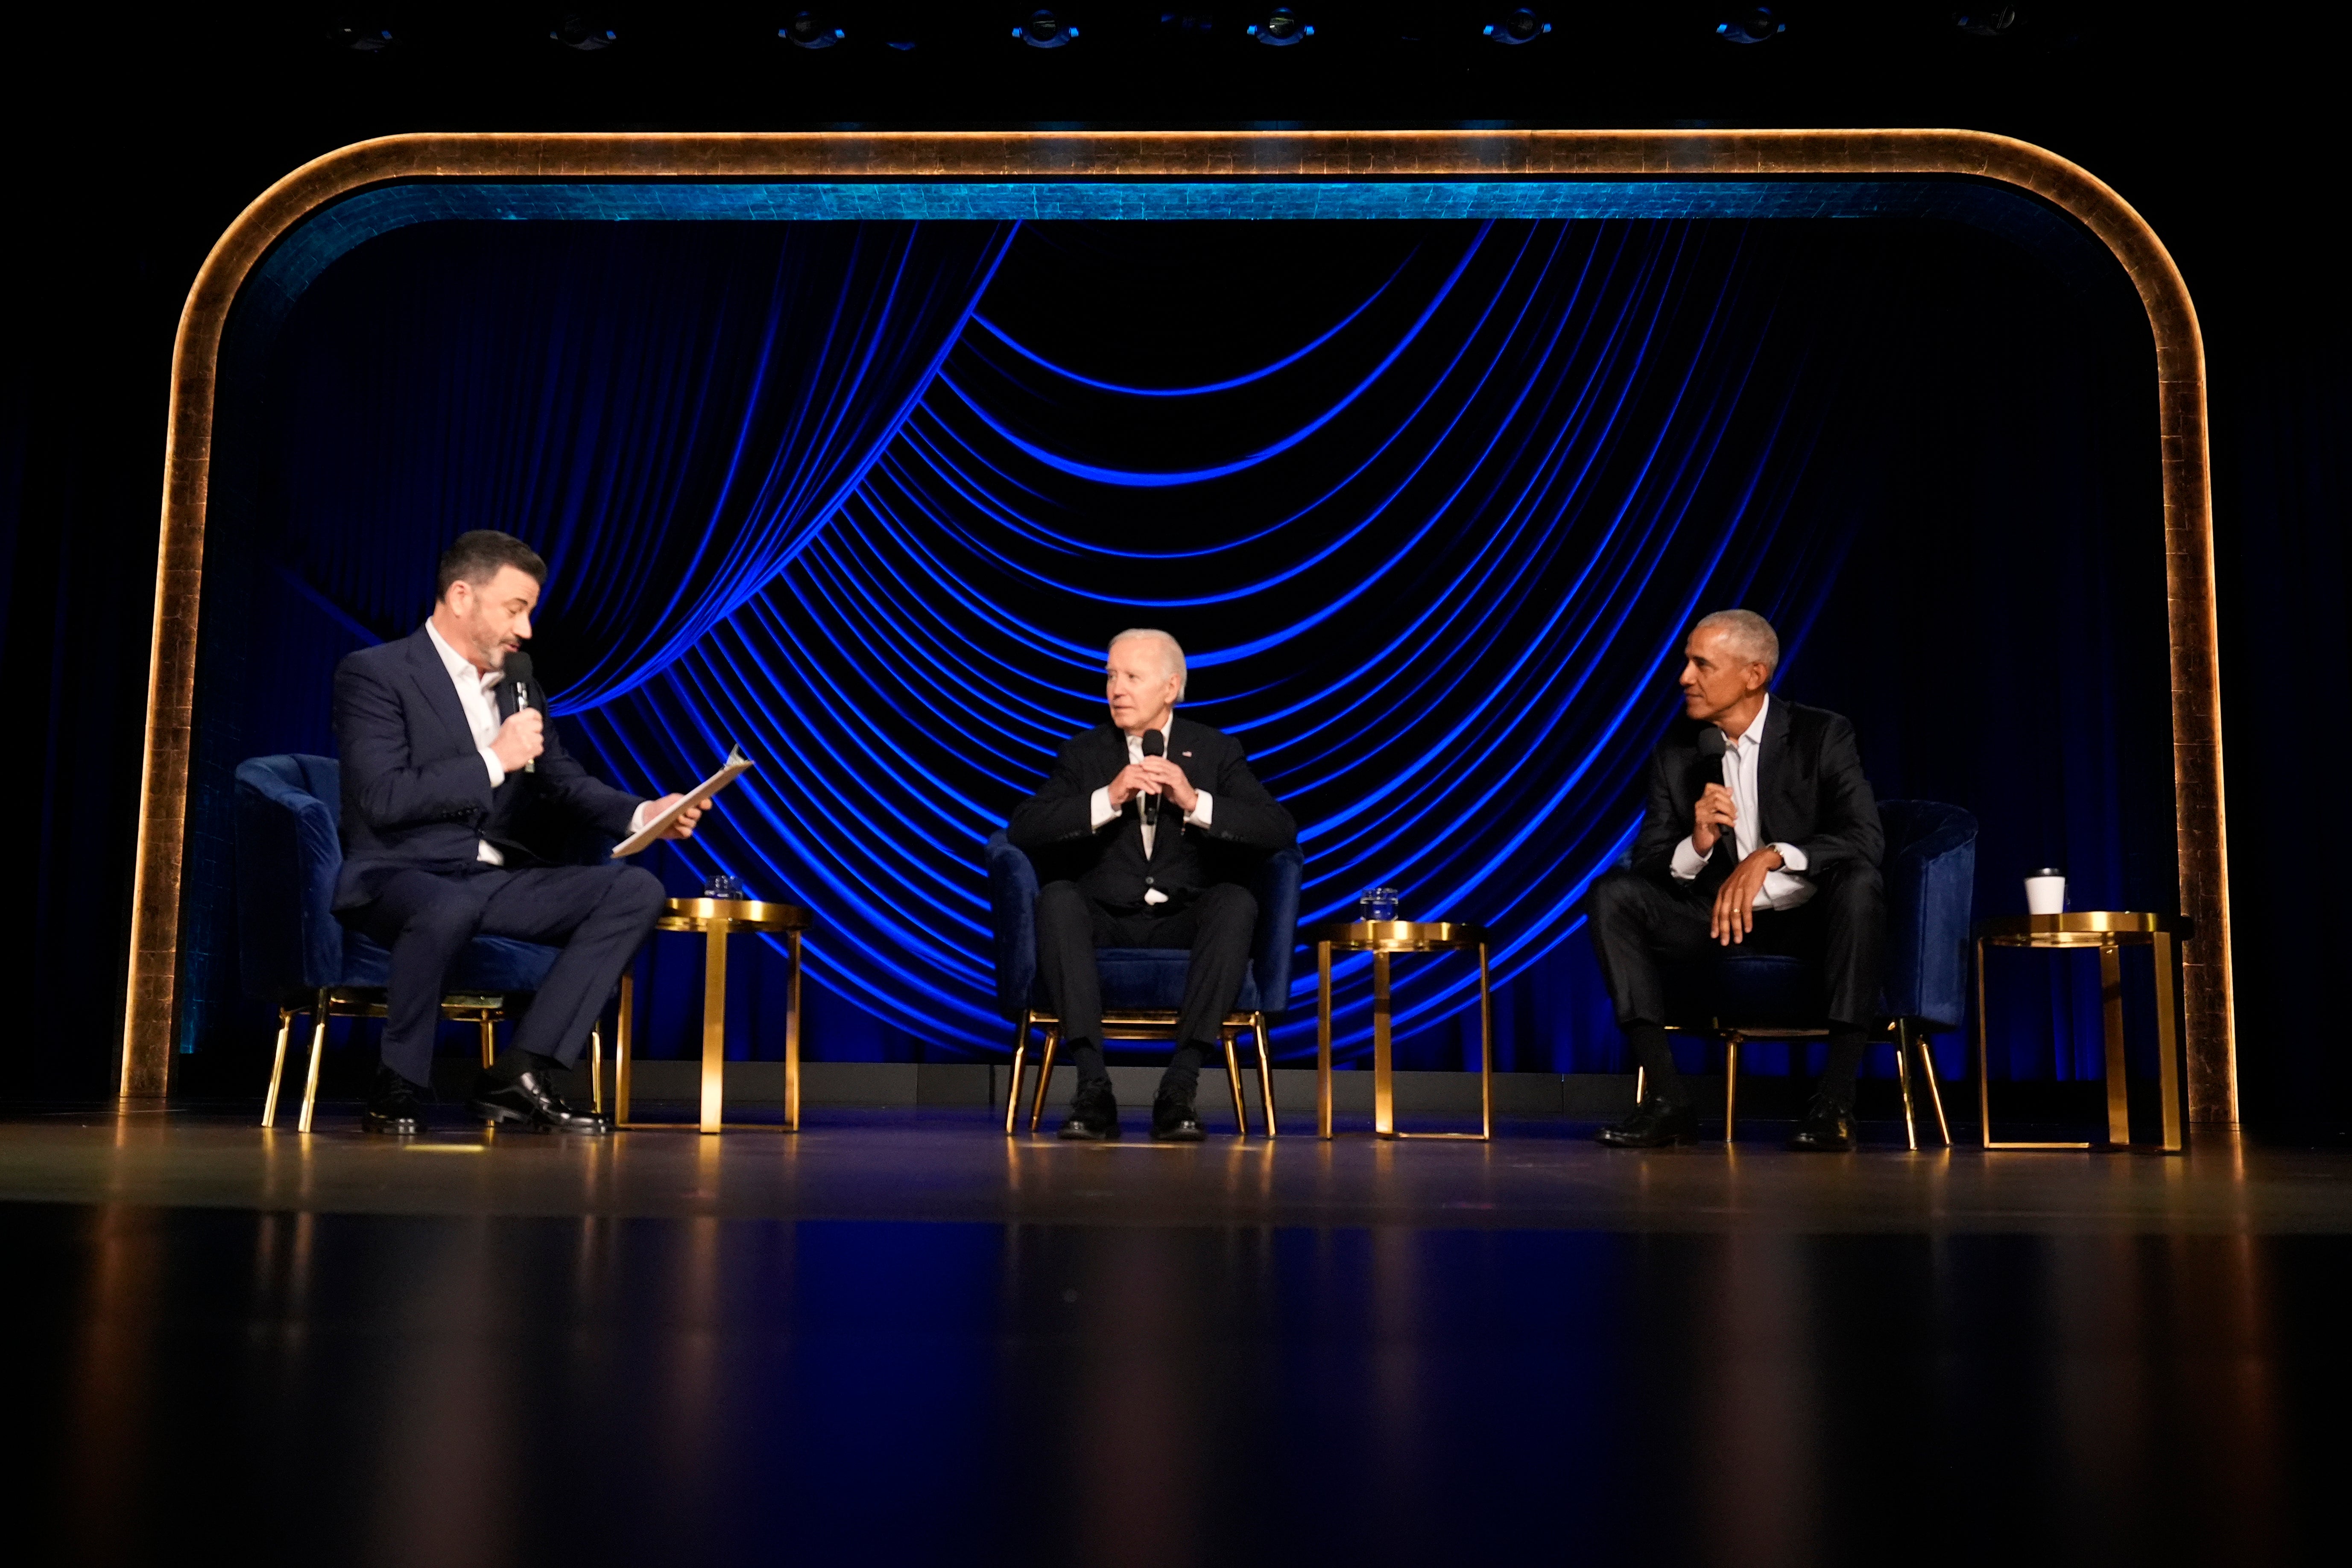 Jimmy Kimmel moderates a panel of President Joe Biden and former president Barack Obama at a fundraising event on Saturday in Los Angeles